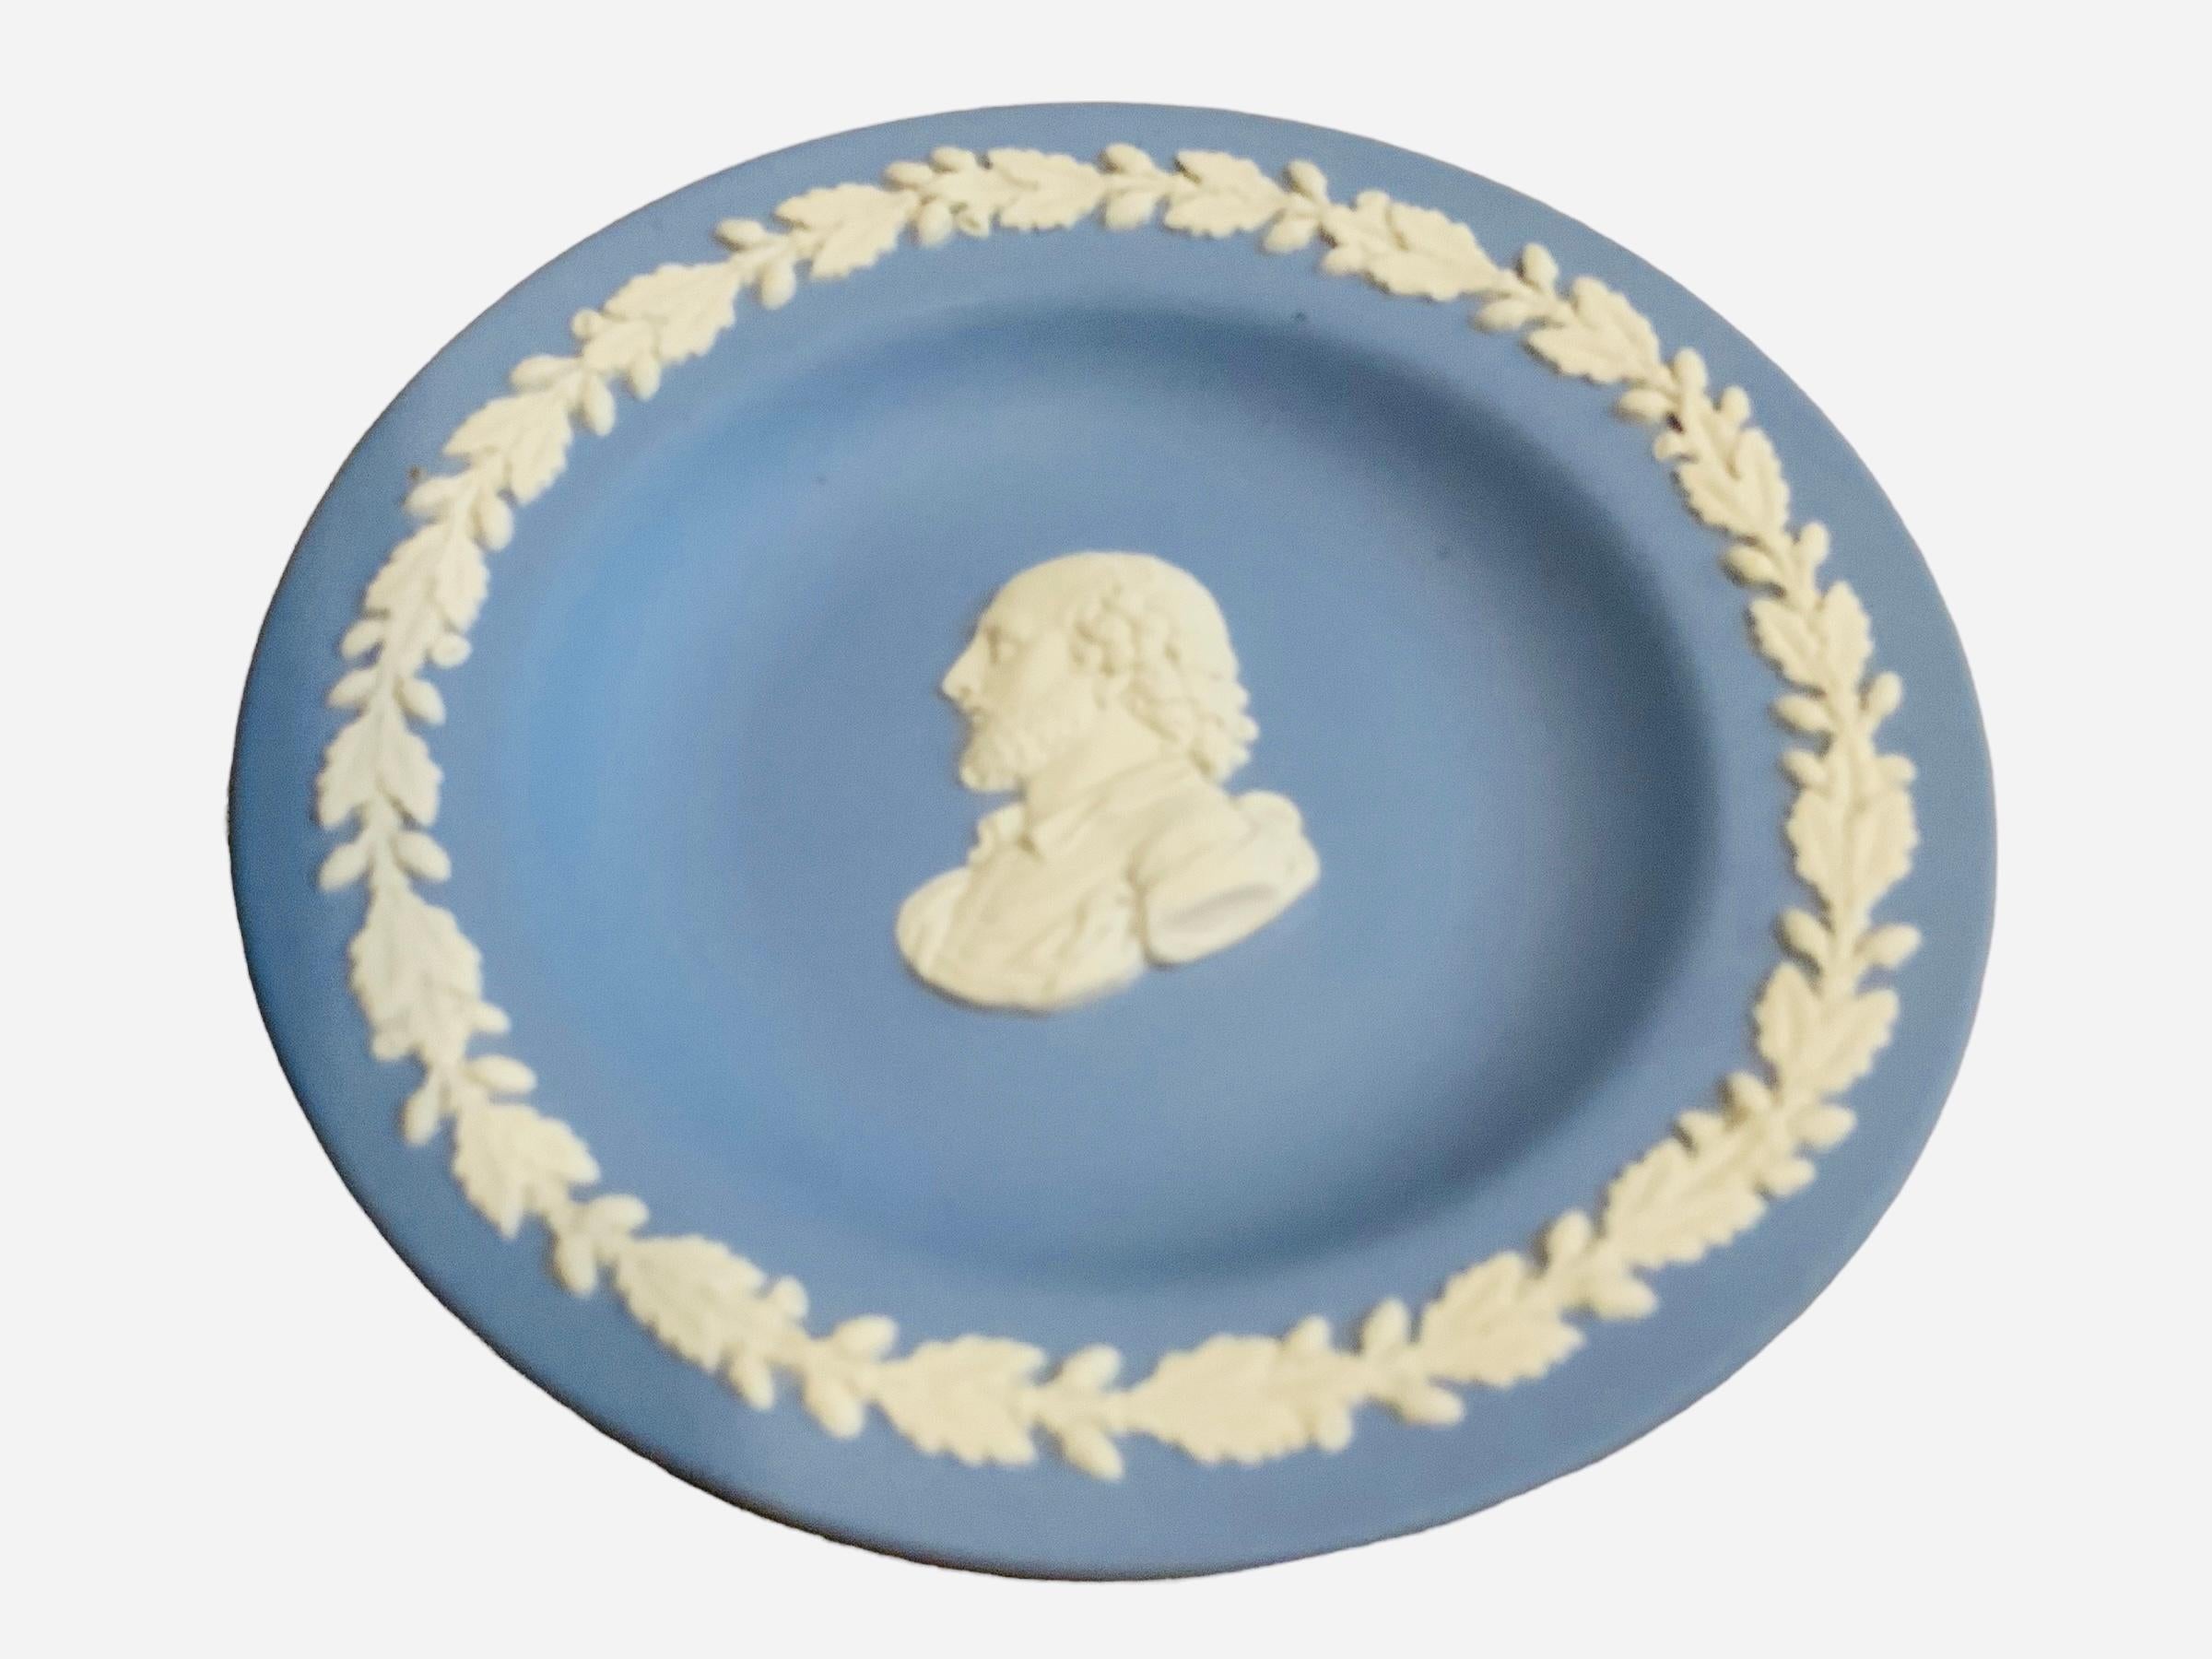 Repoussé Blue Wedgwood Jasperware Small Plate For Sale